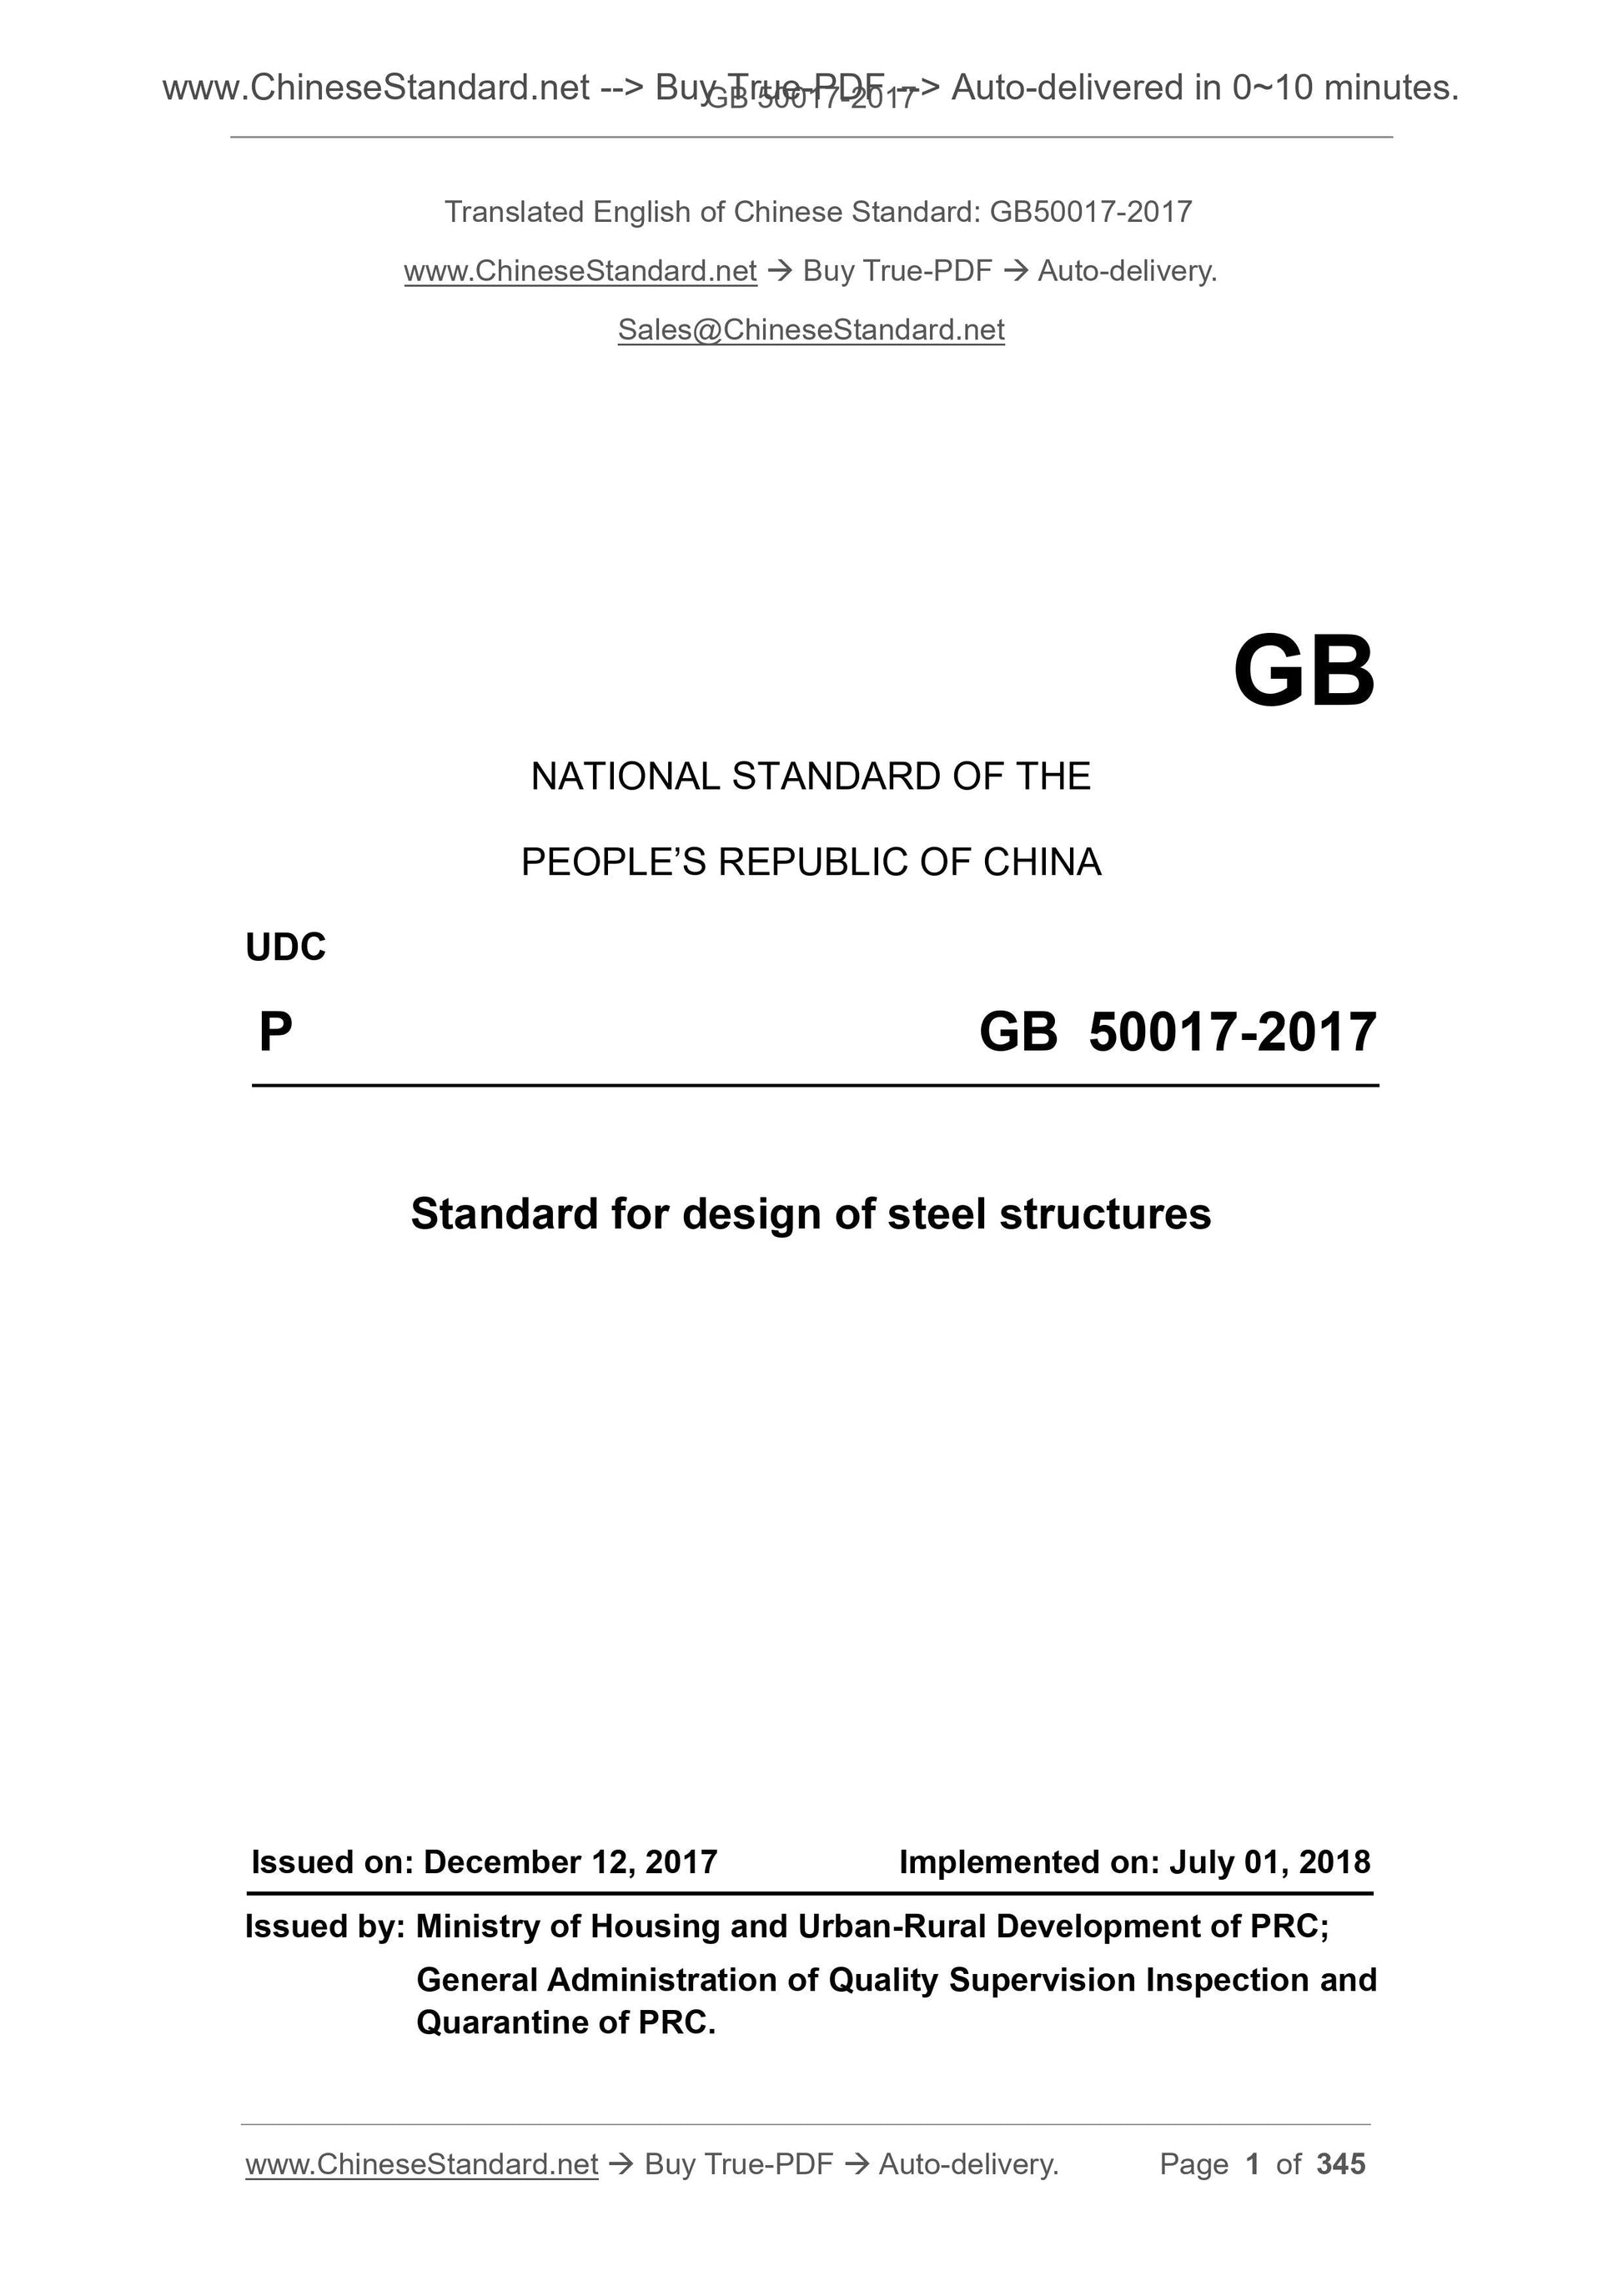 GB 50017-2017 Page 1